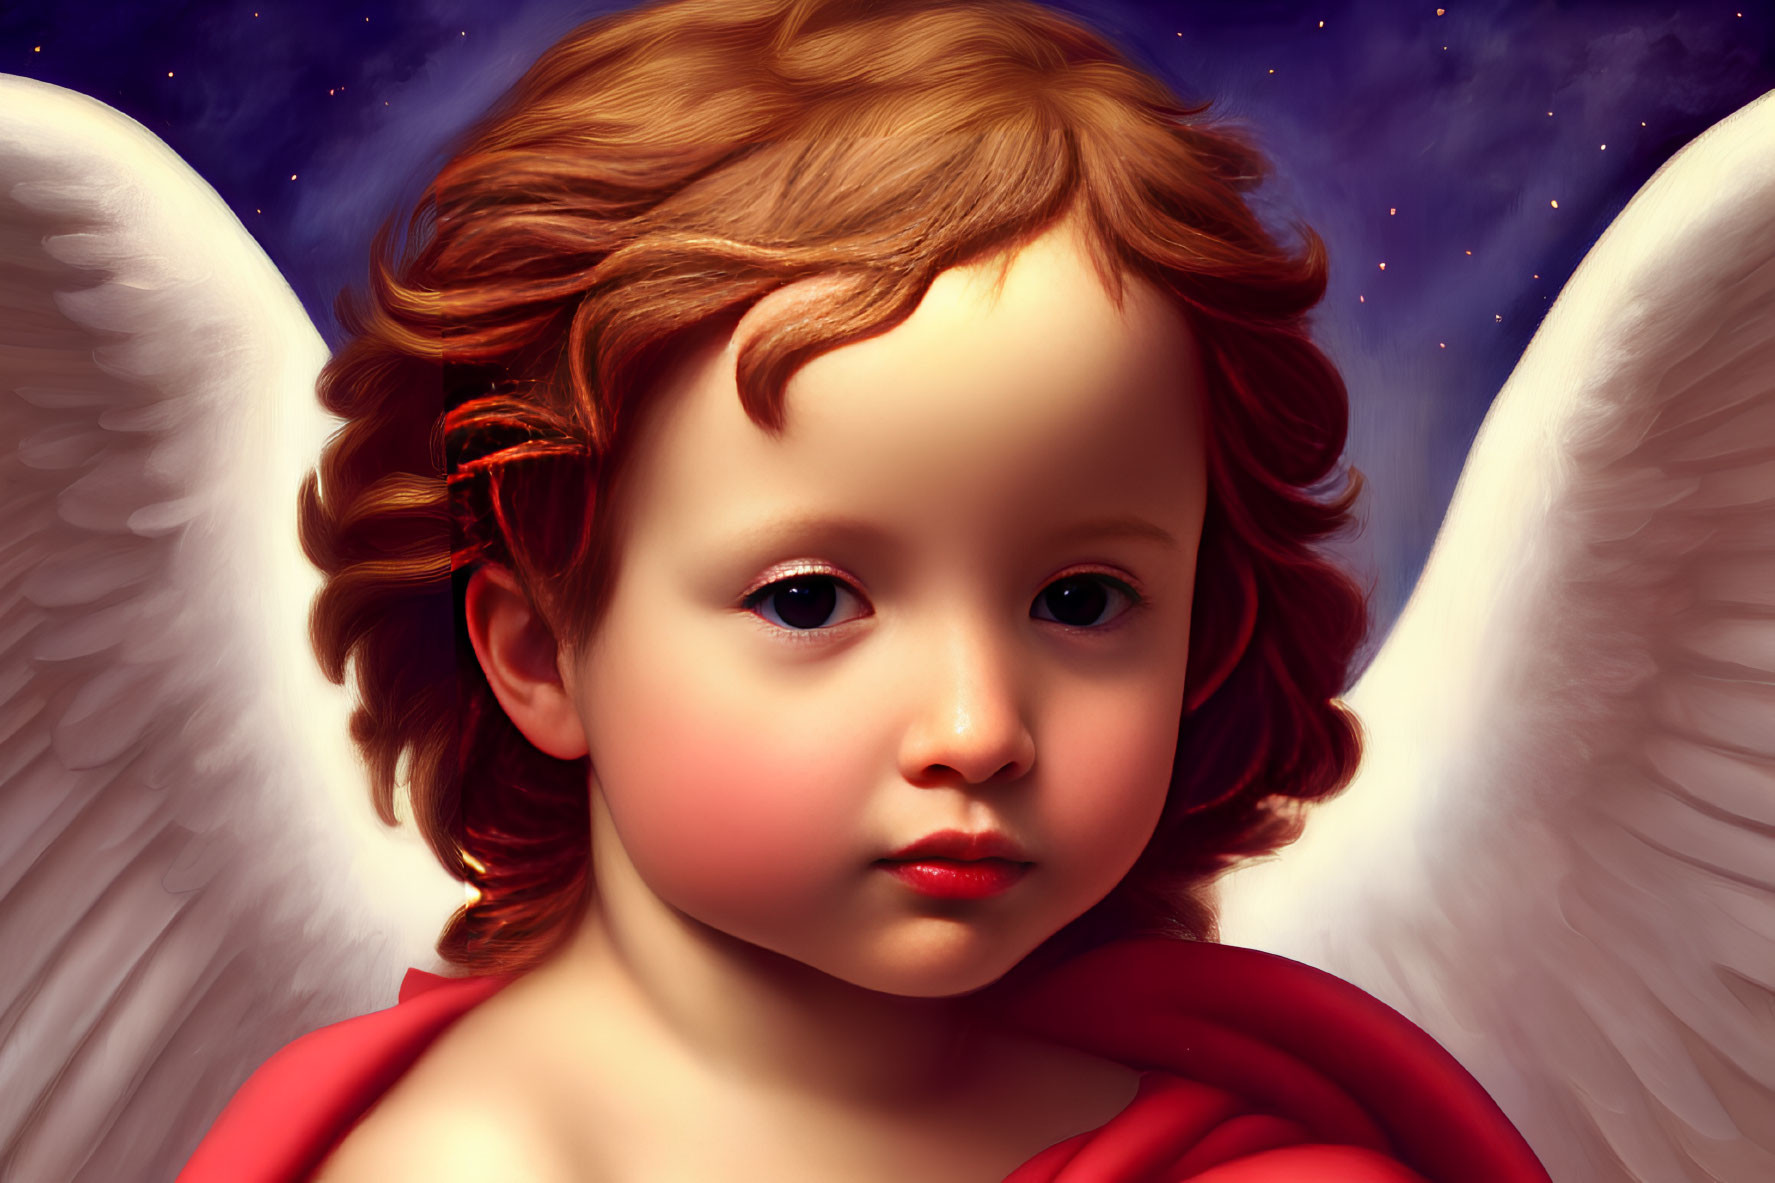 Cherubic figure with golden-brown hair and angelic wings in red cloak